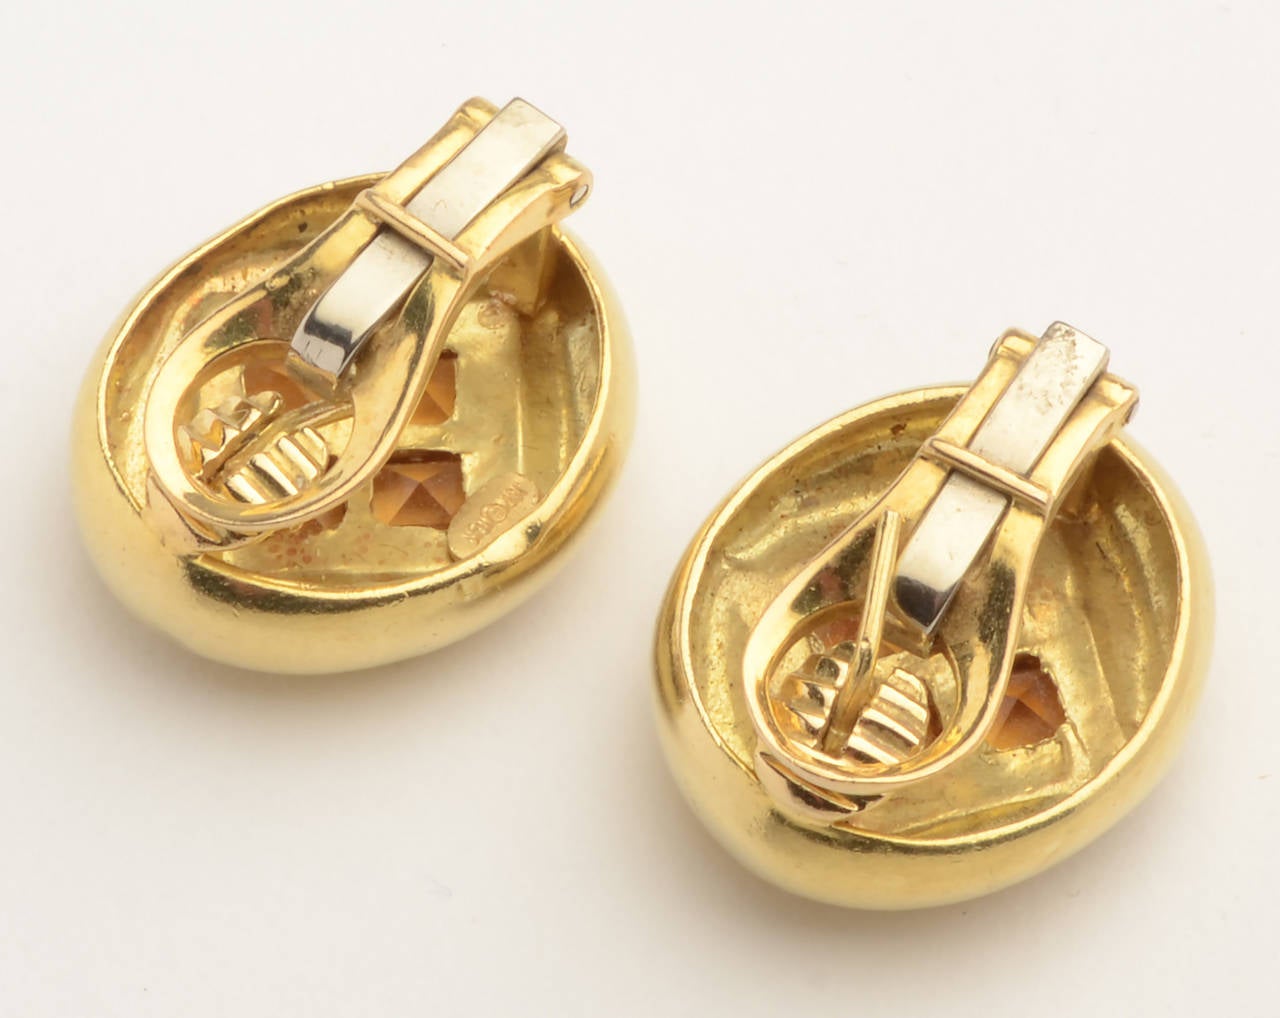 Four square citrines are set on point in these 18 karat oval earrings. The stones are richly honey colored.  The gold surround is nicely curved to give the effect of considerable volume. Backs are clips with collapsible posts. Marked JSE a maker